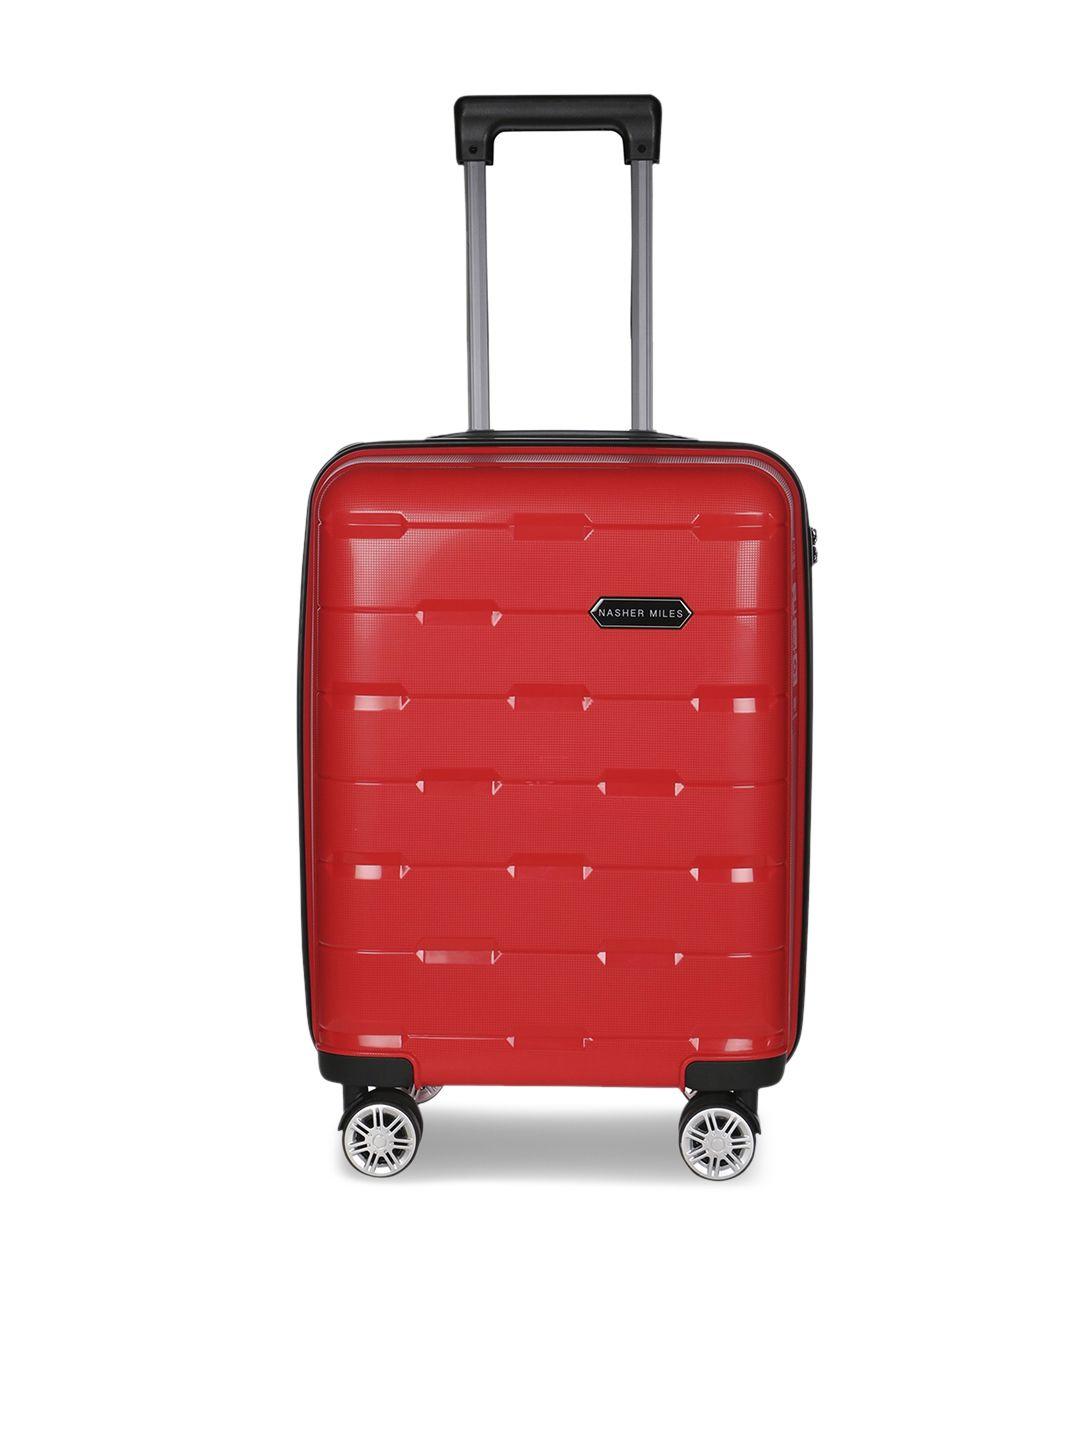 nasher miles red hard-sided cabin trolley bag